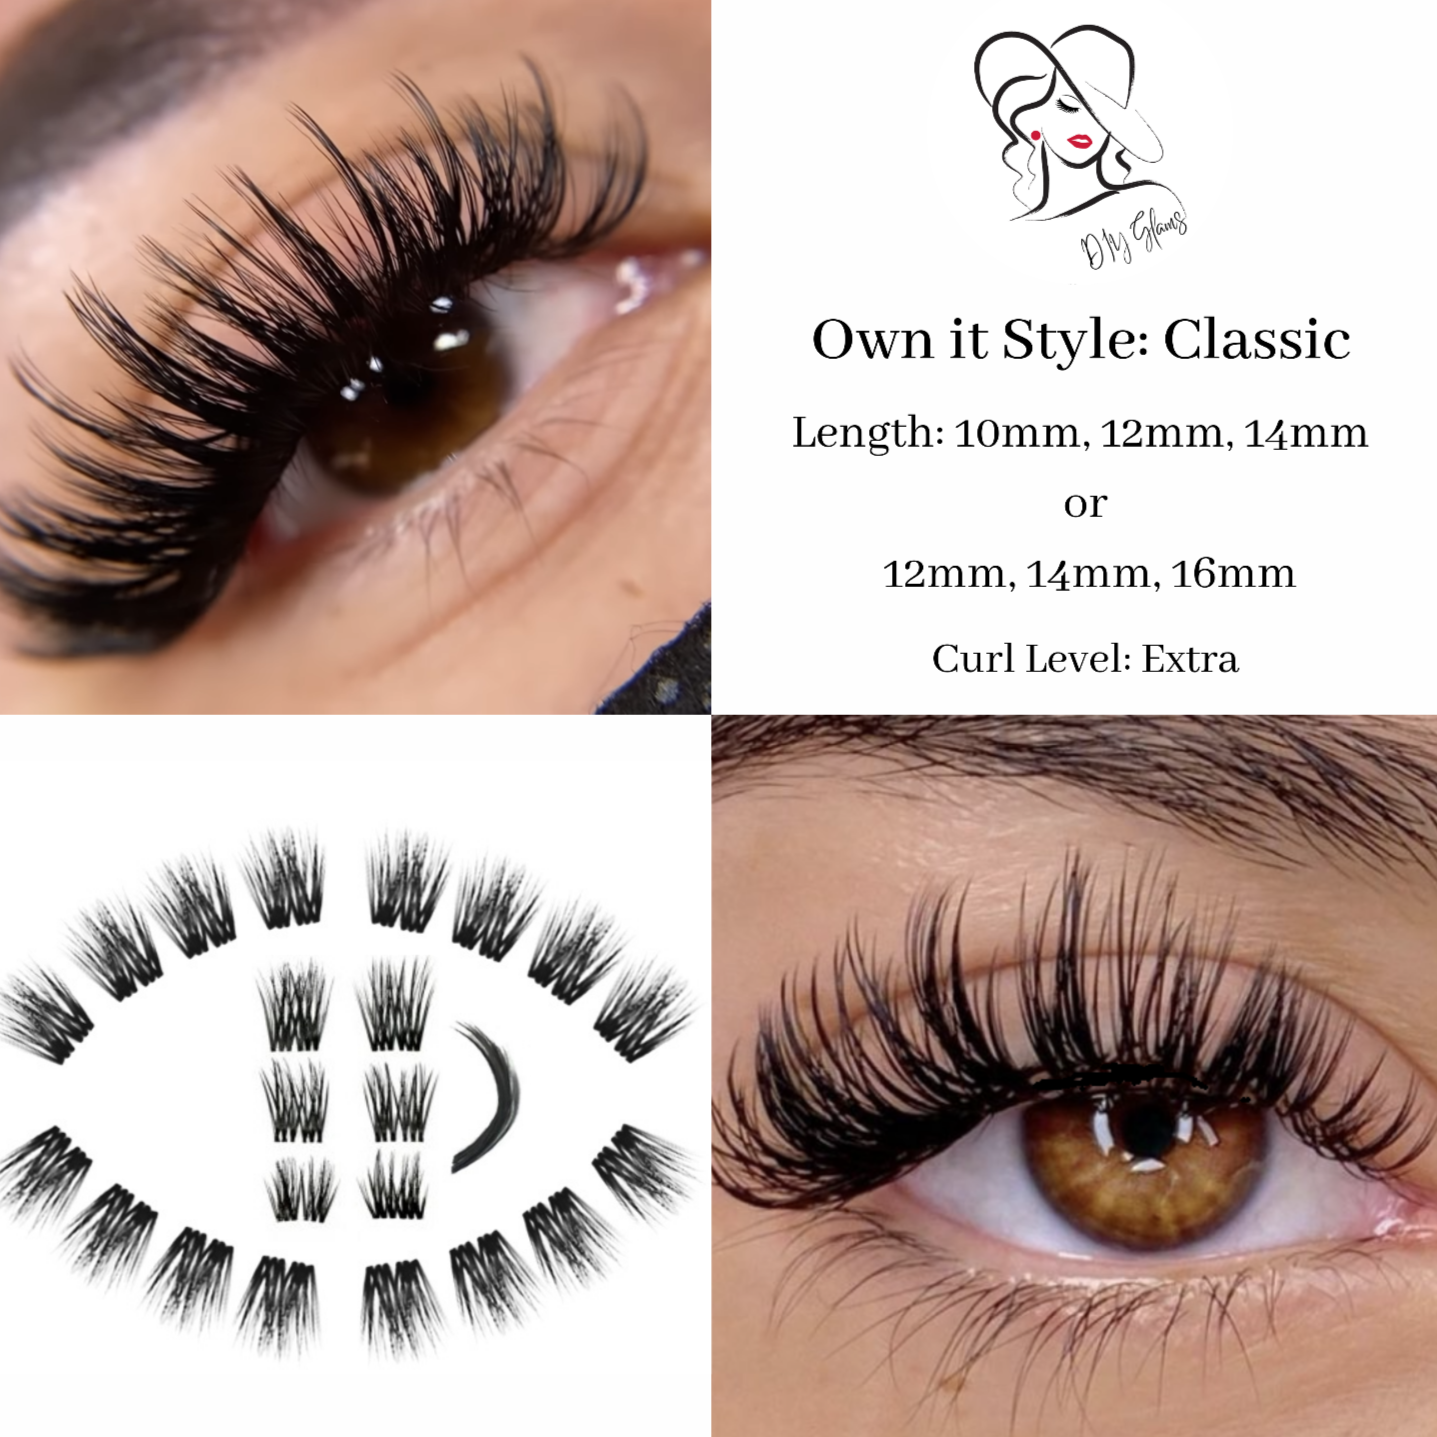 Own it Style: Classic- Curl type: Extra -  E11 Store